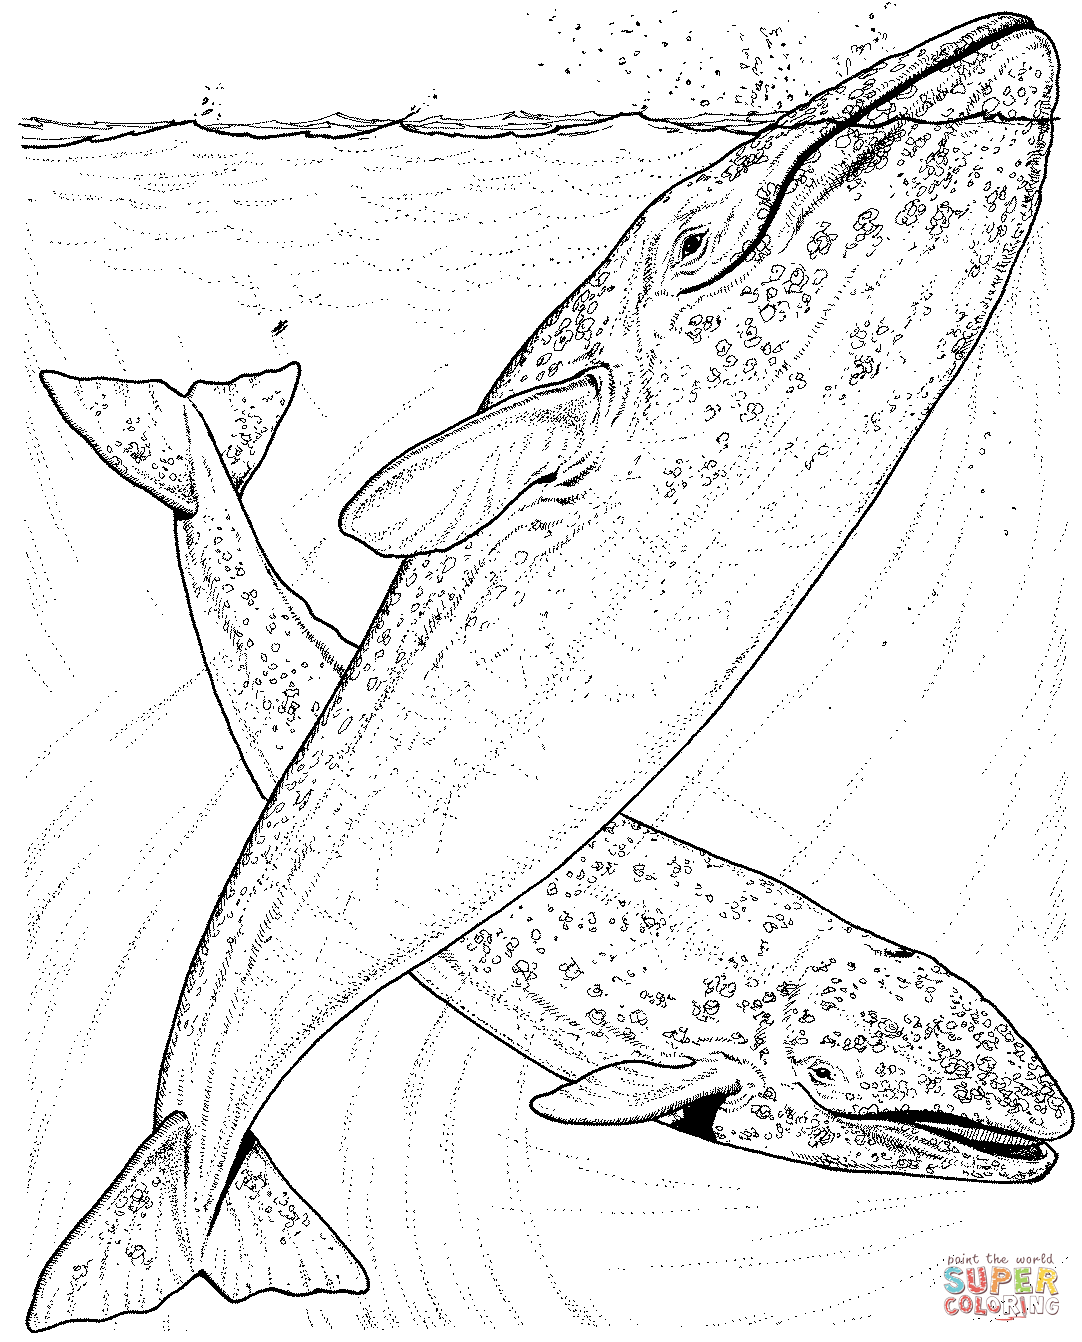 Whale coloring #3, Download drawings